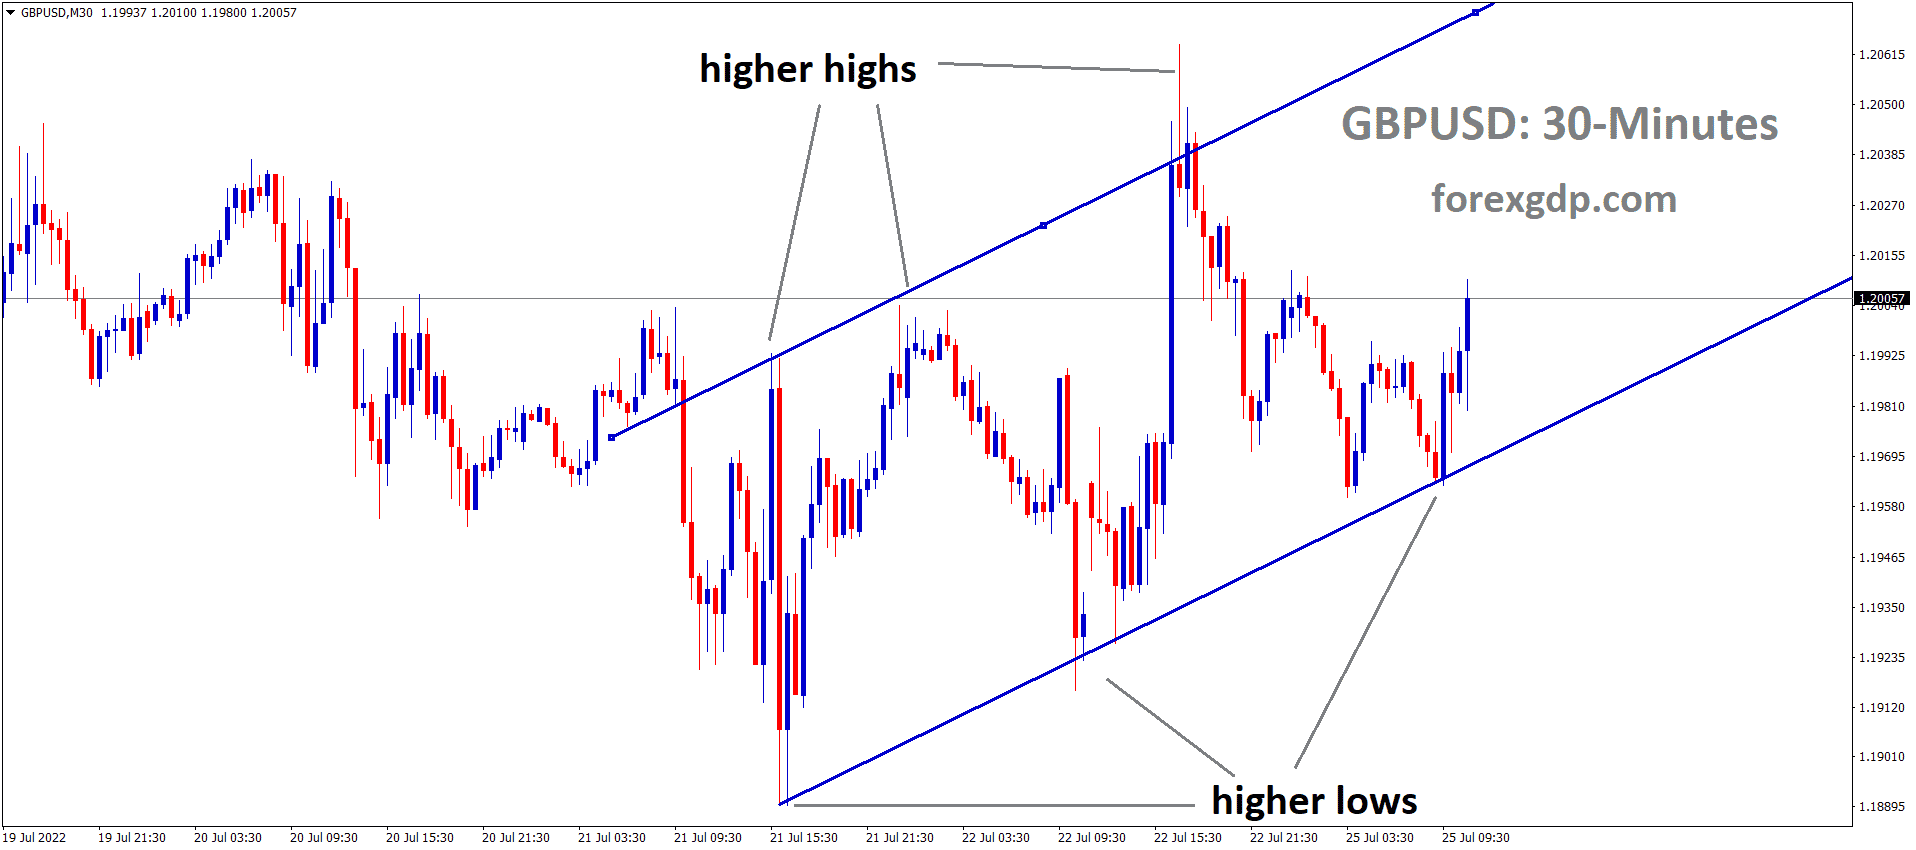 GBPUSD M30 TF analysis Market is moving in an Ascending channel and the Market has rebounded from the higher low area of the Ascending channel.